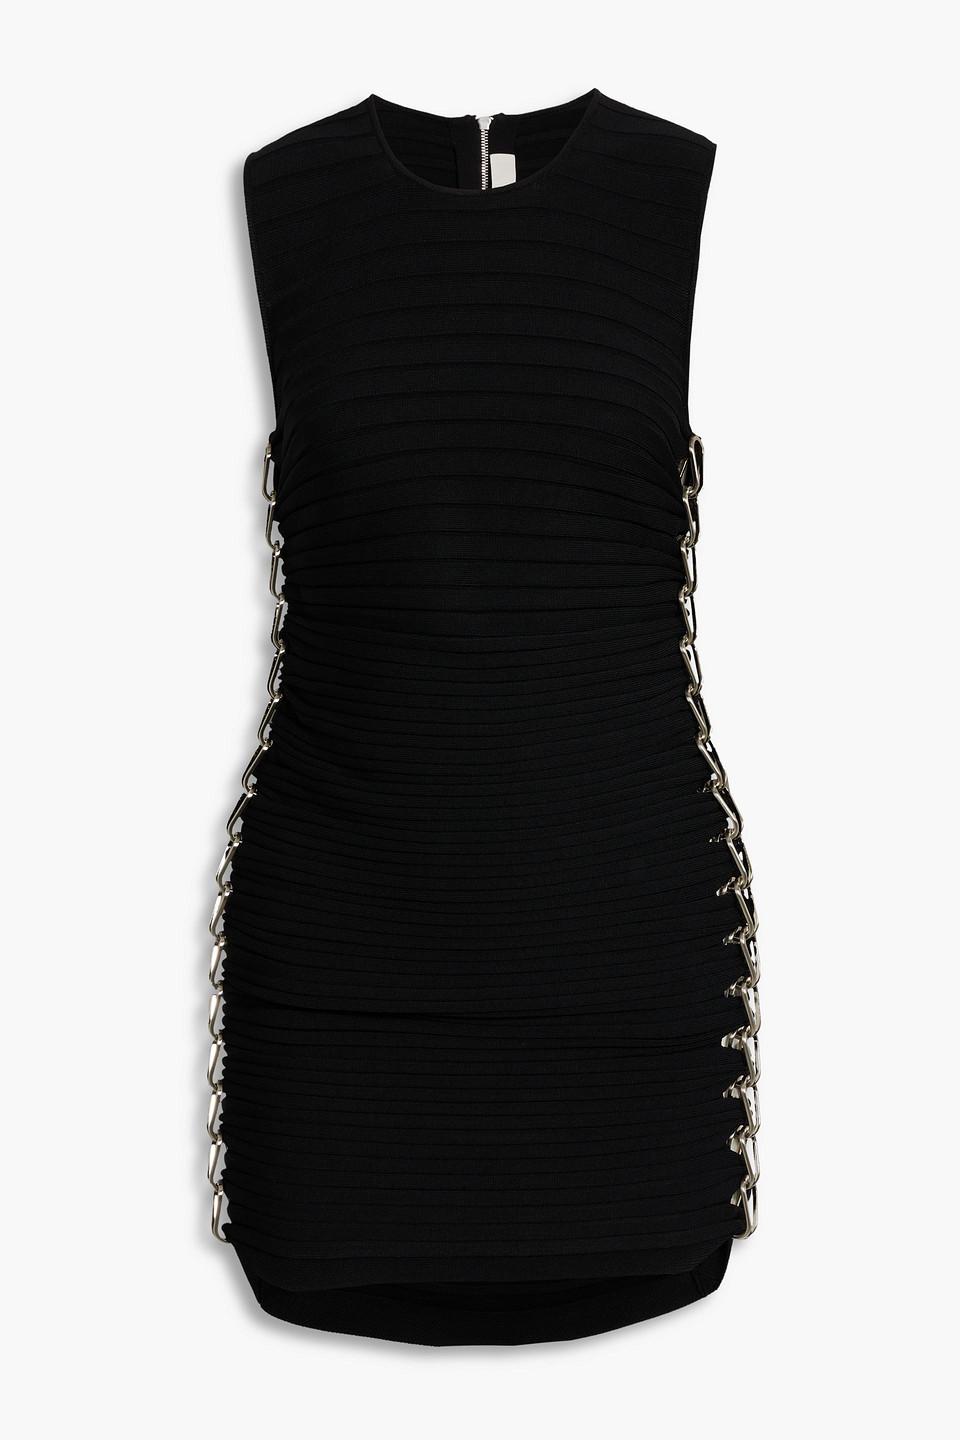 Dion Lee Synthetic Chain Embellished Ribbed Knit Mini Dress In Black Lyst 